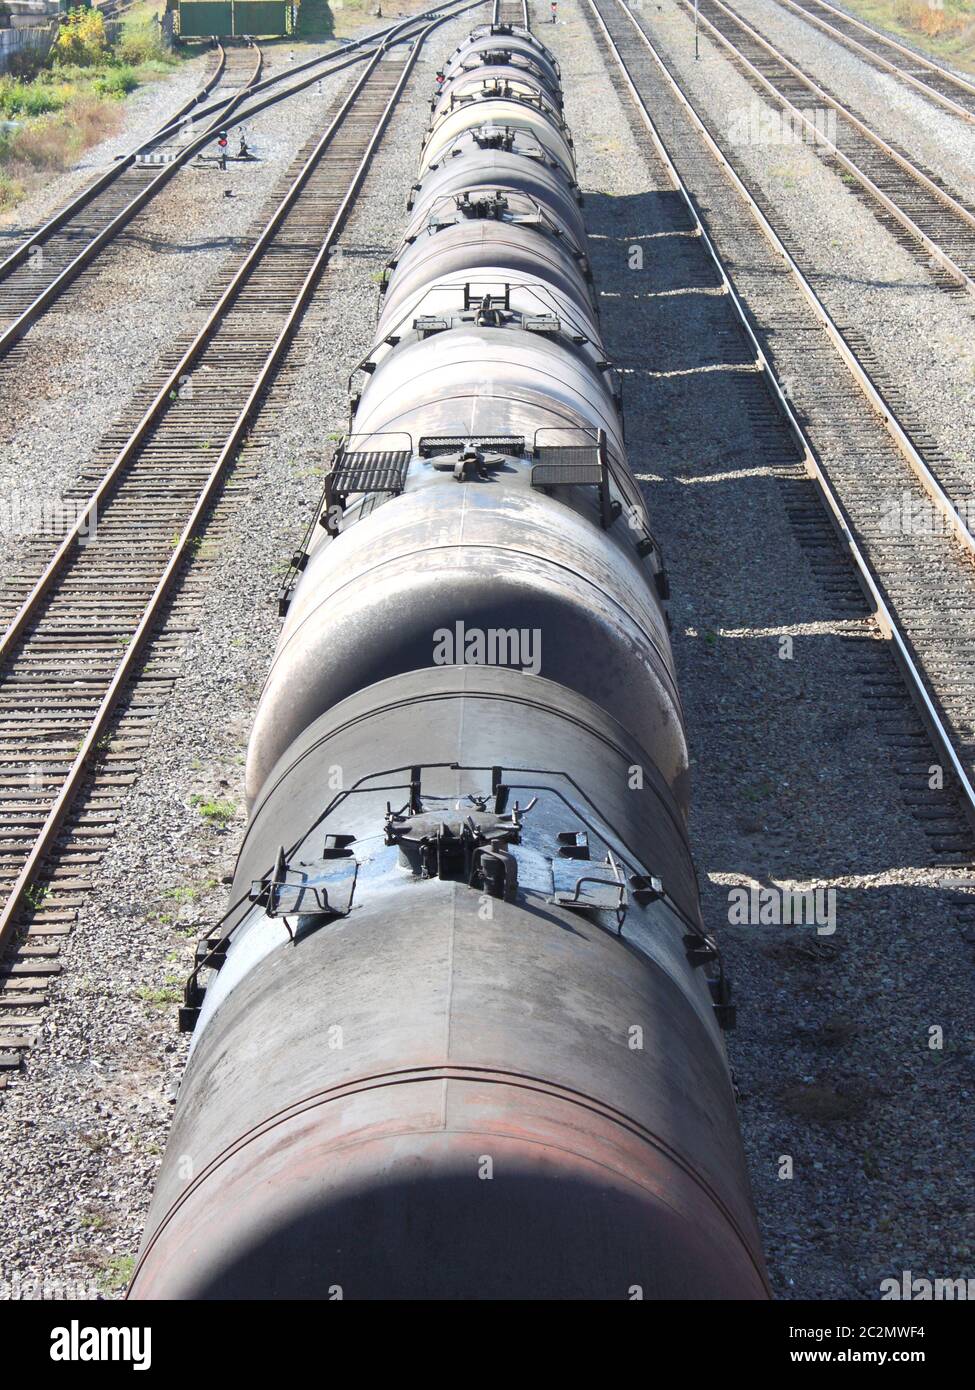 The train transports oil in tanks . Stock Photo